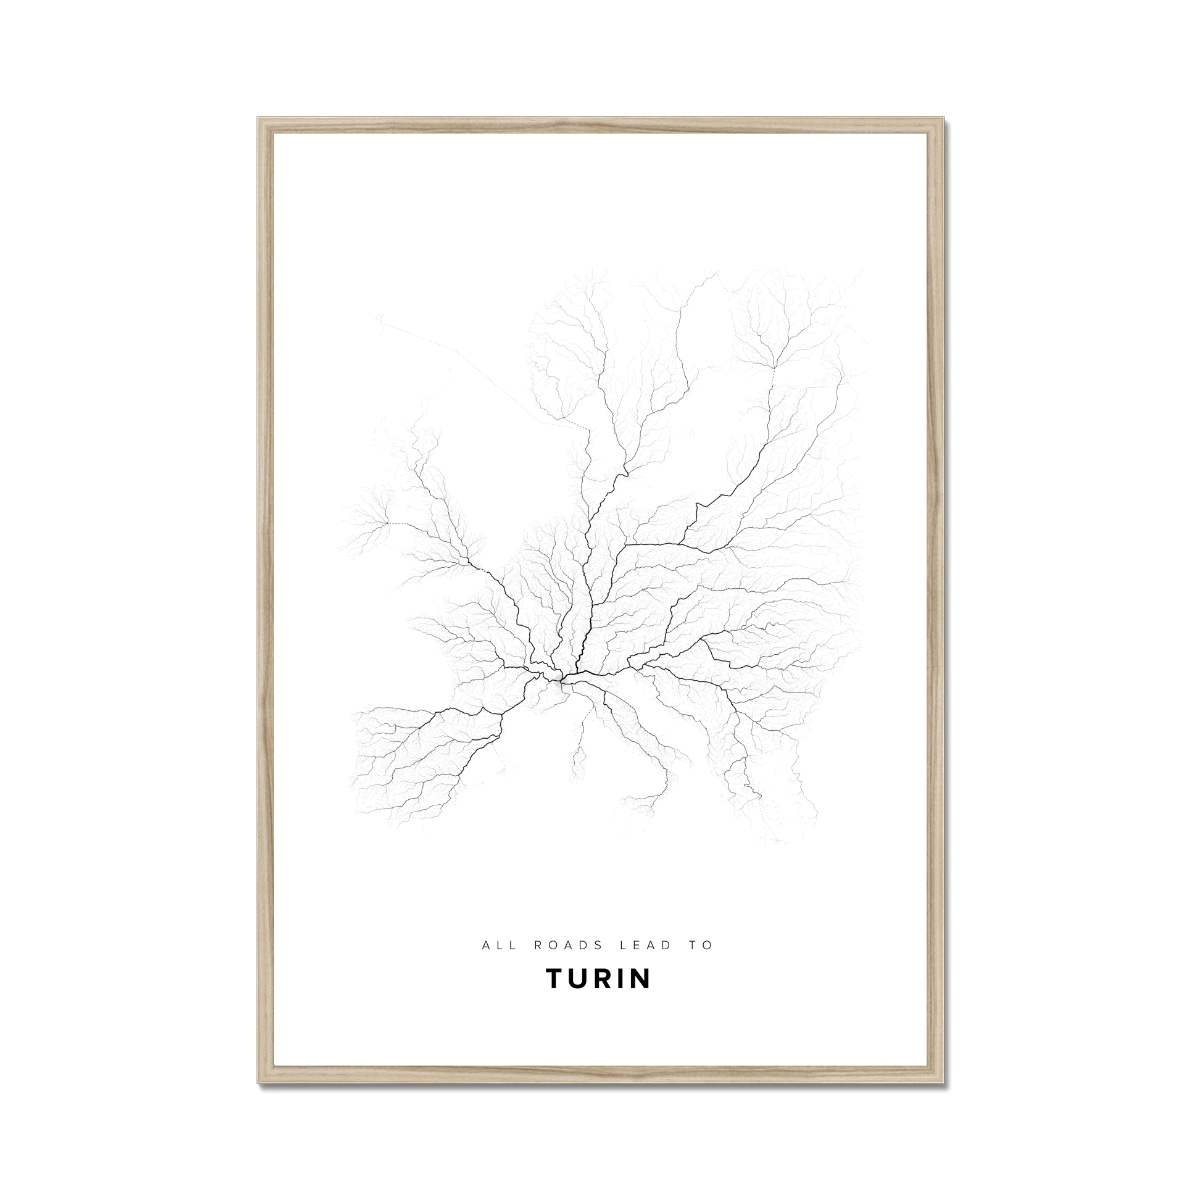 All roads lead to Turin (Italy) Fine Art Map Print